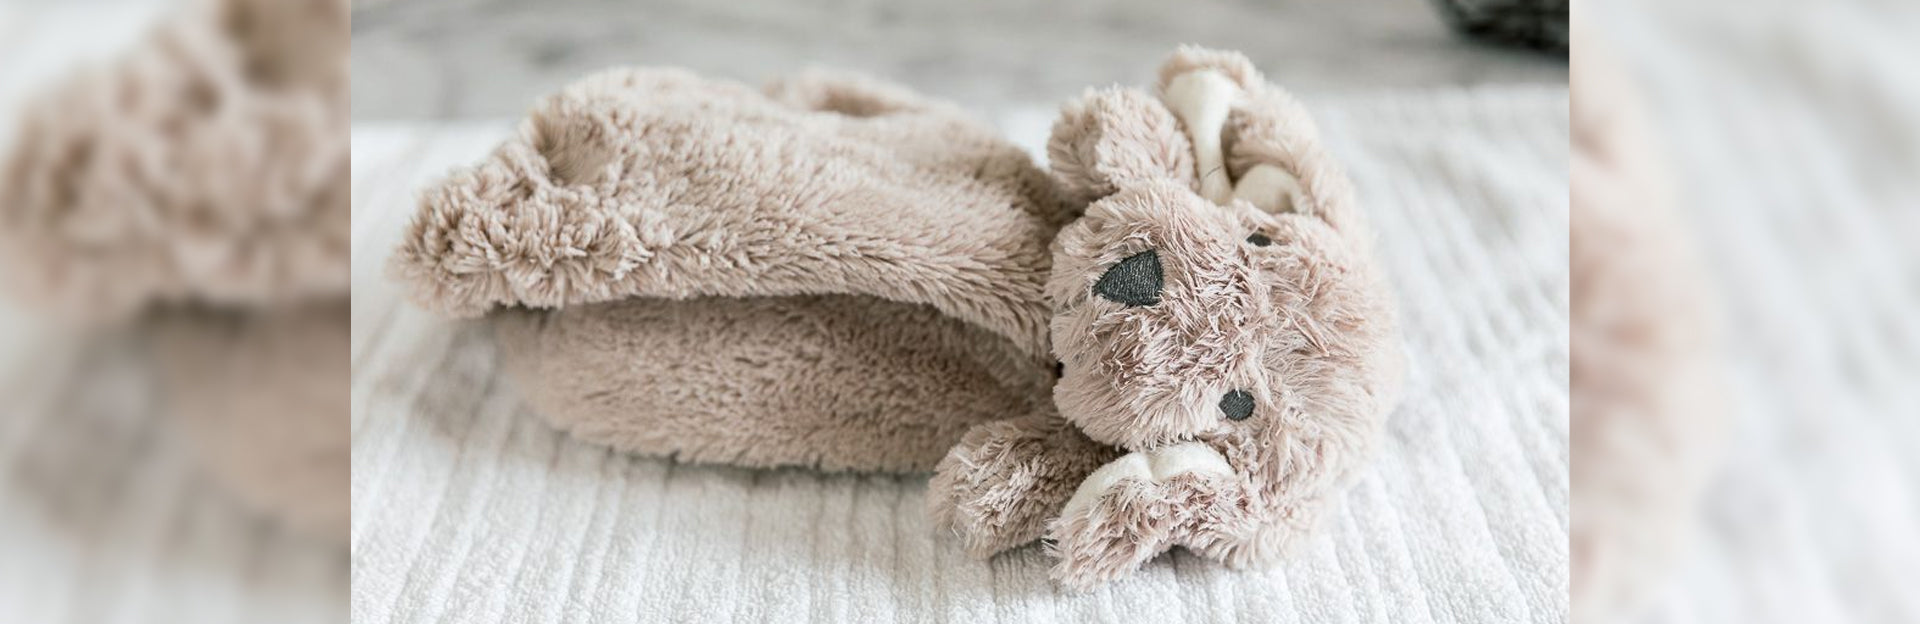 How to Clean Your Stuffed Animals